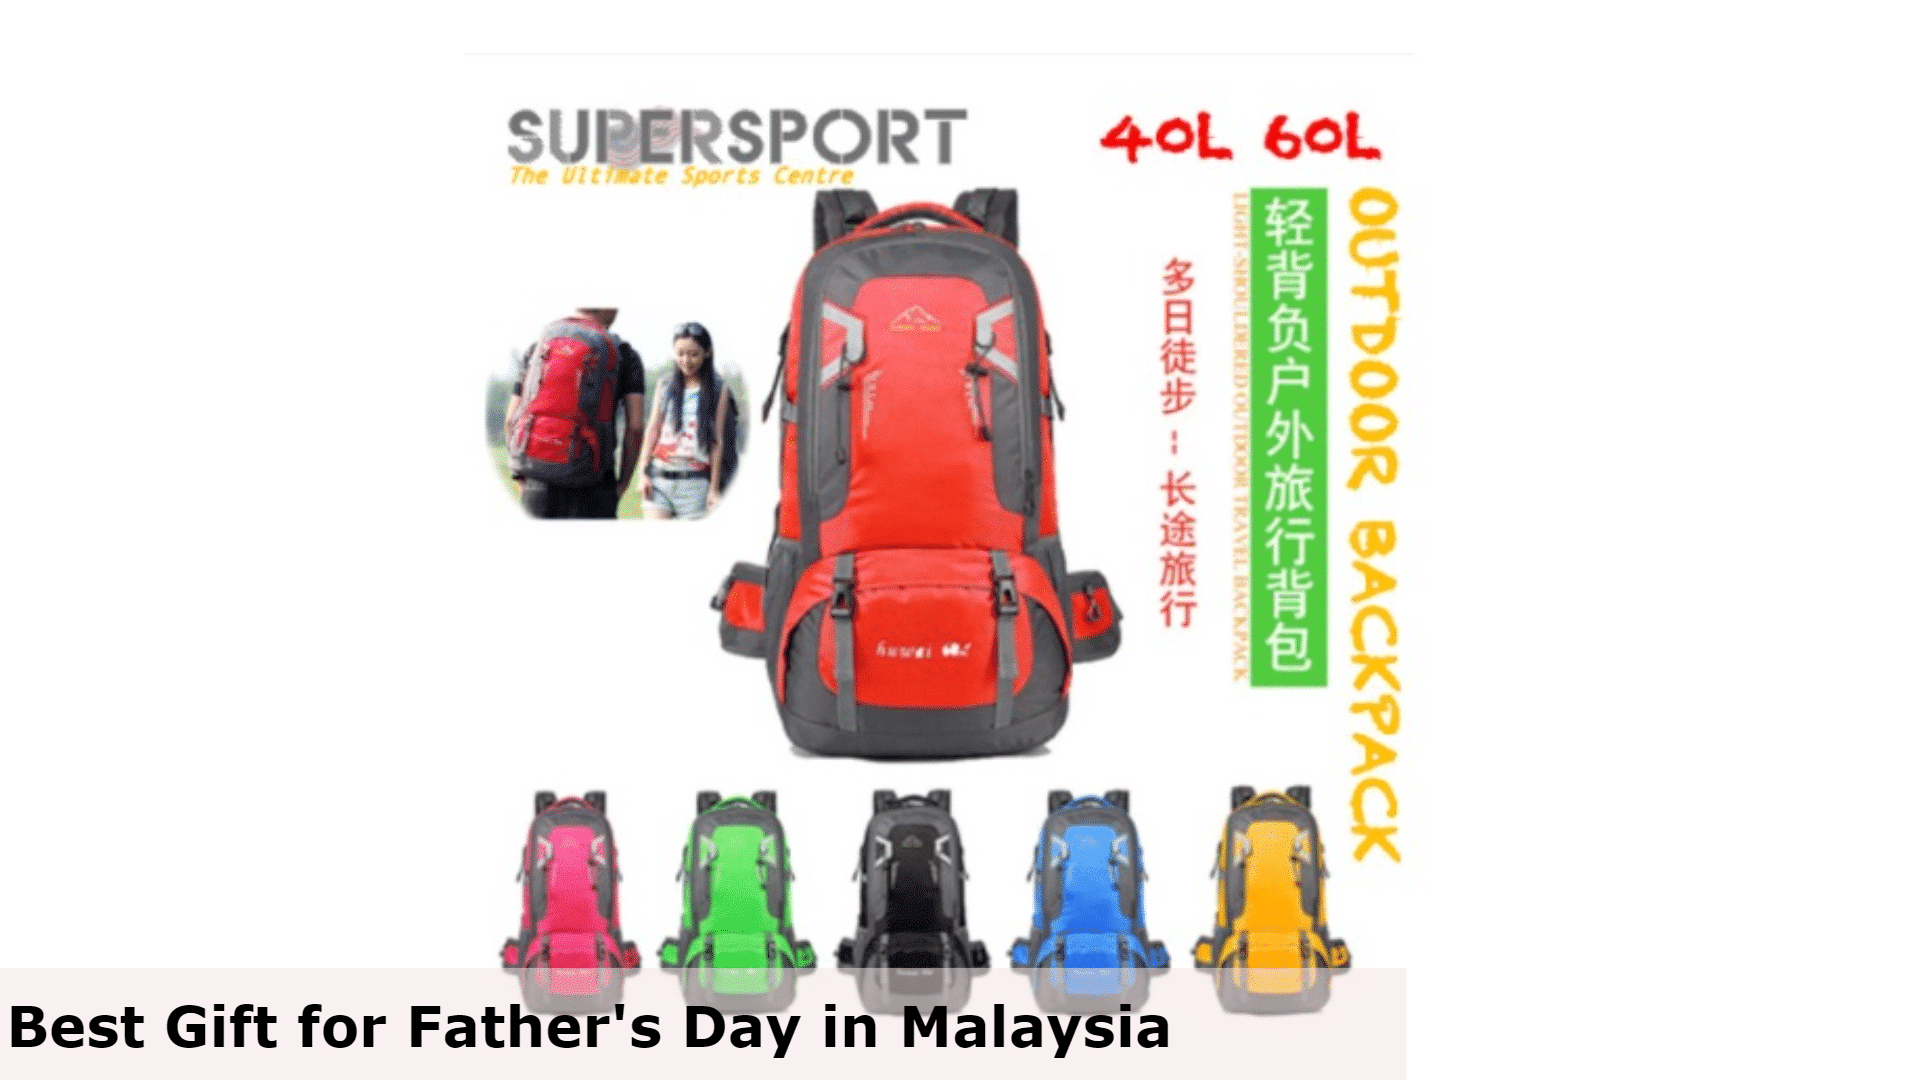 Hiking Backpack - Best Gift for Father's Day in Malaysia, Best gift for Father's Day Malaysia, Best Father's Day Gifts for Dad, What do dads want for Father's Day in Malaysia?, What is a good cheap gift for Father's Day in Malaysia?, Do you give gifts on Father's Day in Malaysia?, gifts for dad who wants nothing, simple father's day gift ideas, father's day gift ideas 2022, father's day gift ideas during covid, father's day gift ideas from daughter, unique gifts for dad, father's day gift ideas from wife, fathers day gifts from son, What buy for a dad that doesn't want anything?, What to get a dad that is hard to buy for?, What should I get my boring dad for Christmas?, What gifts do dads like?,